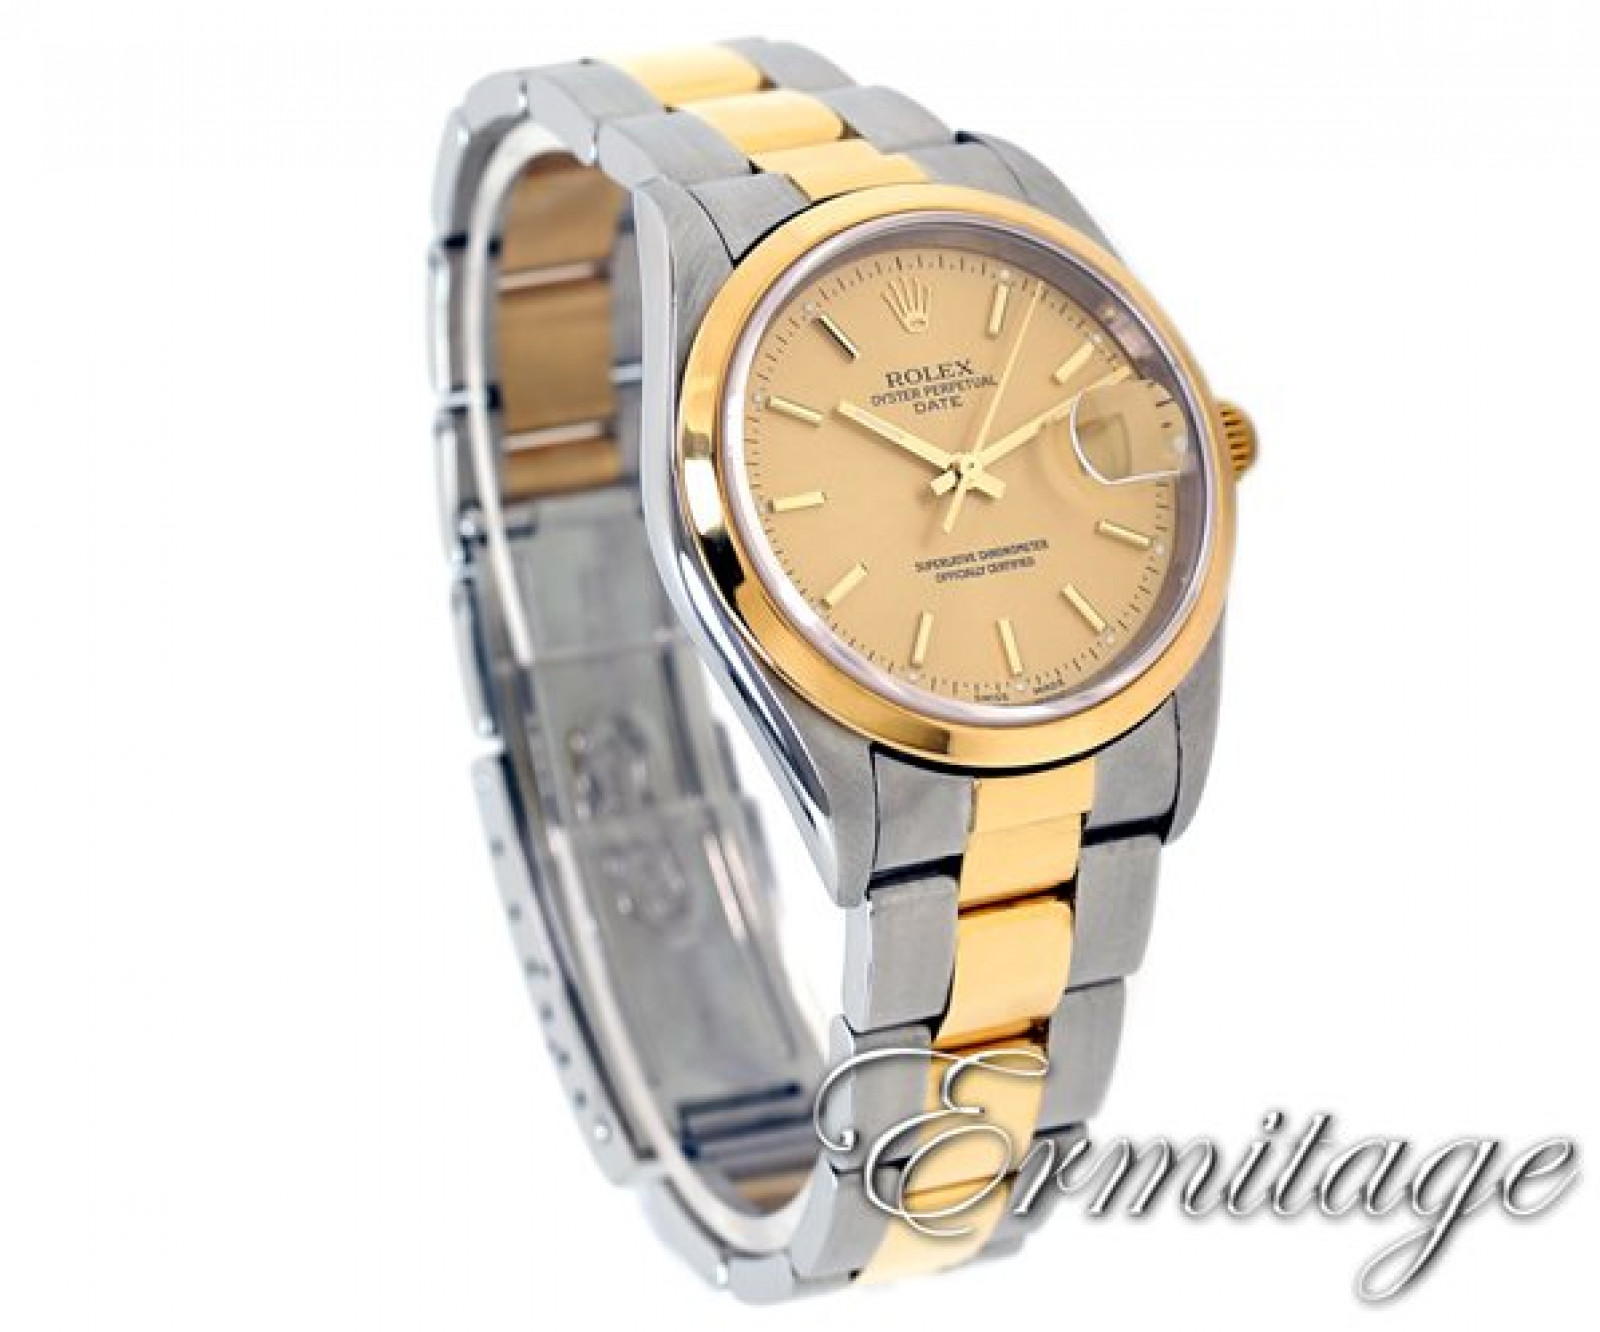 Rolex Oyster Perpetual Date 15203 Gold & Steel